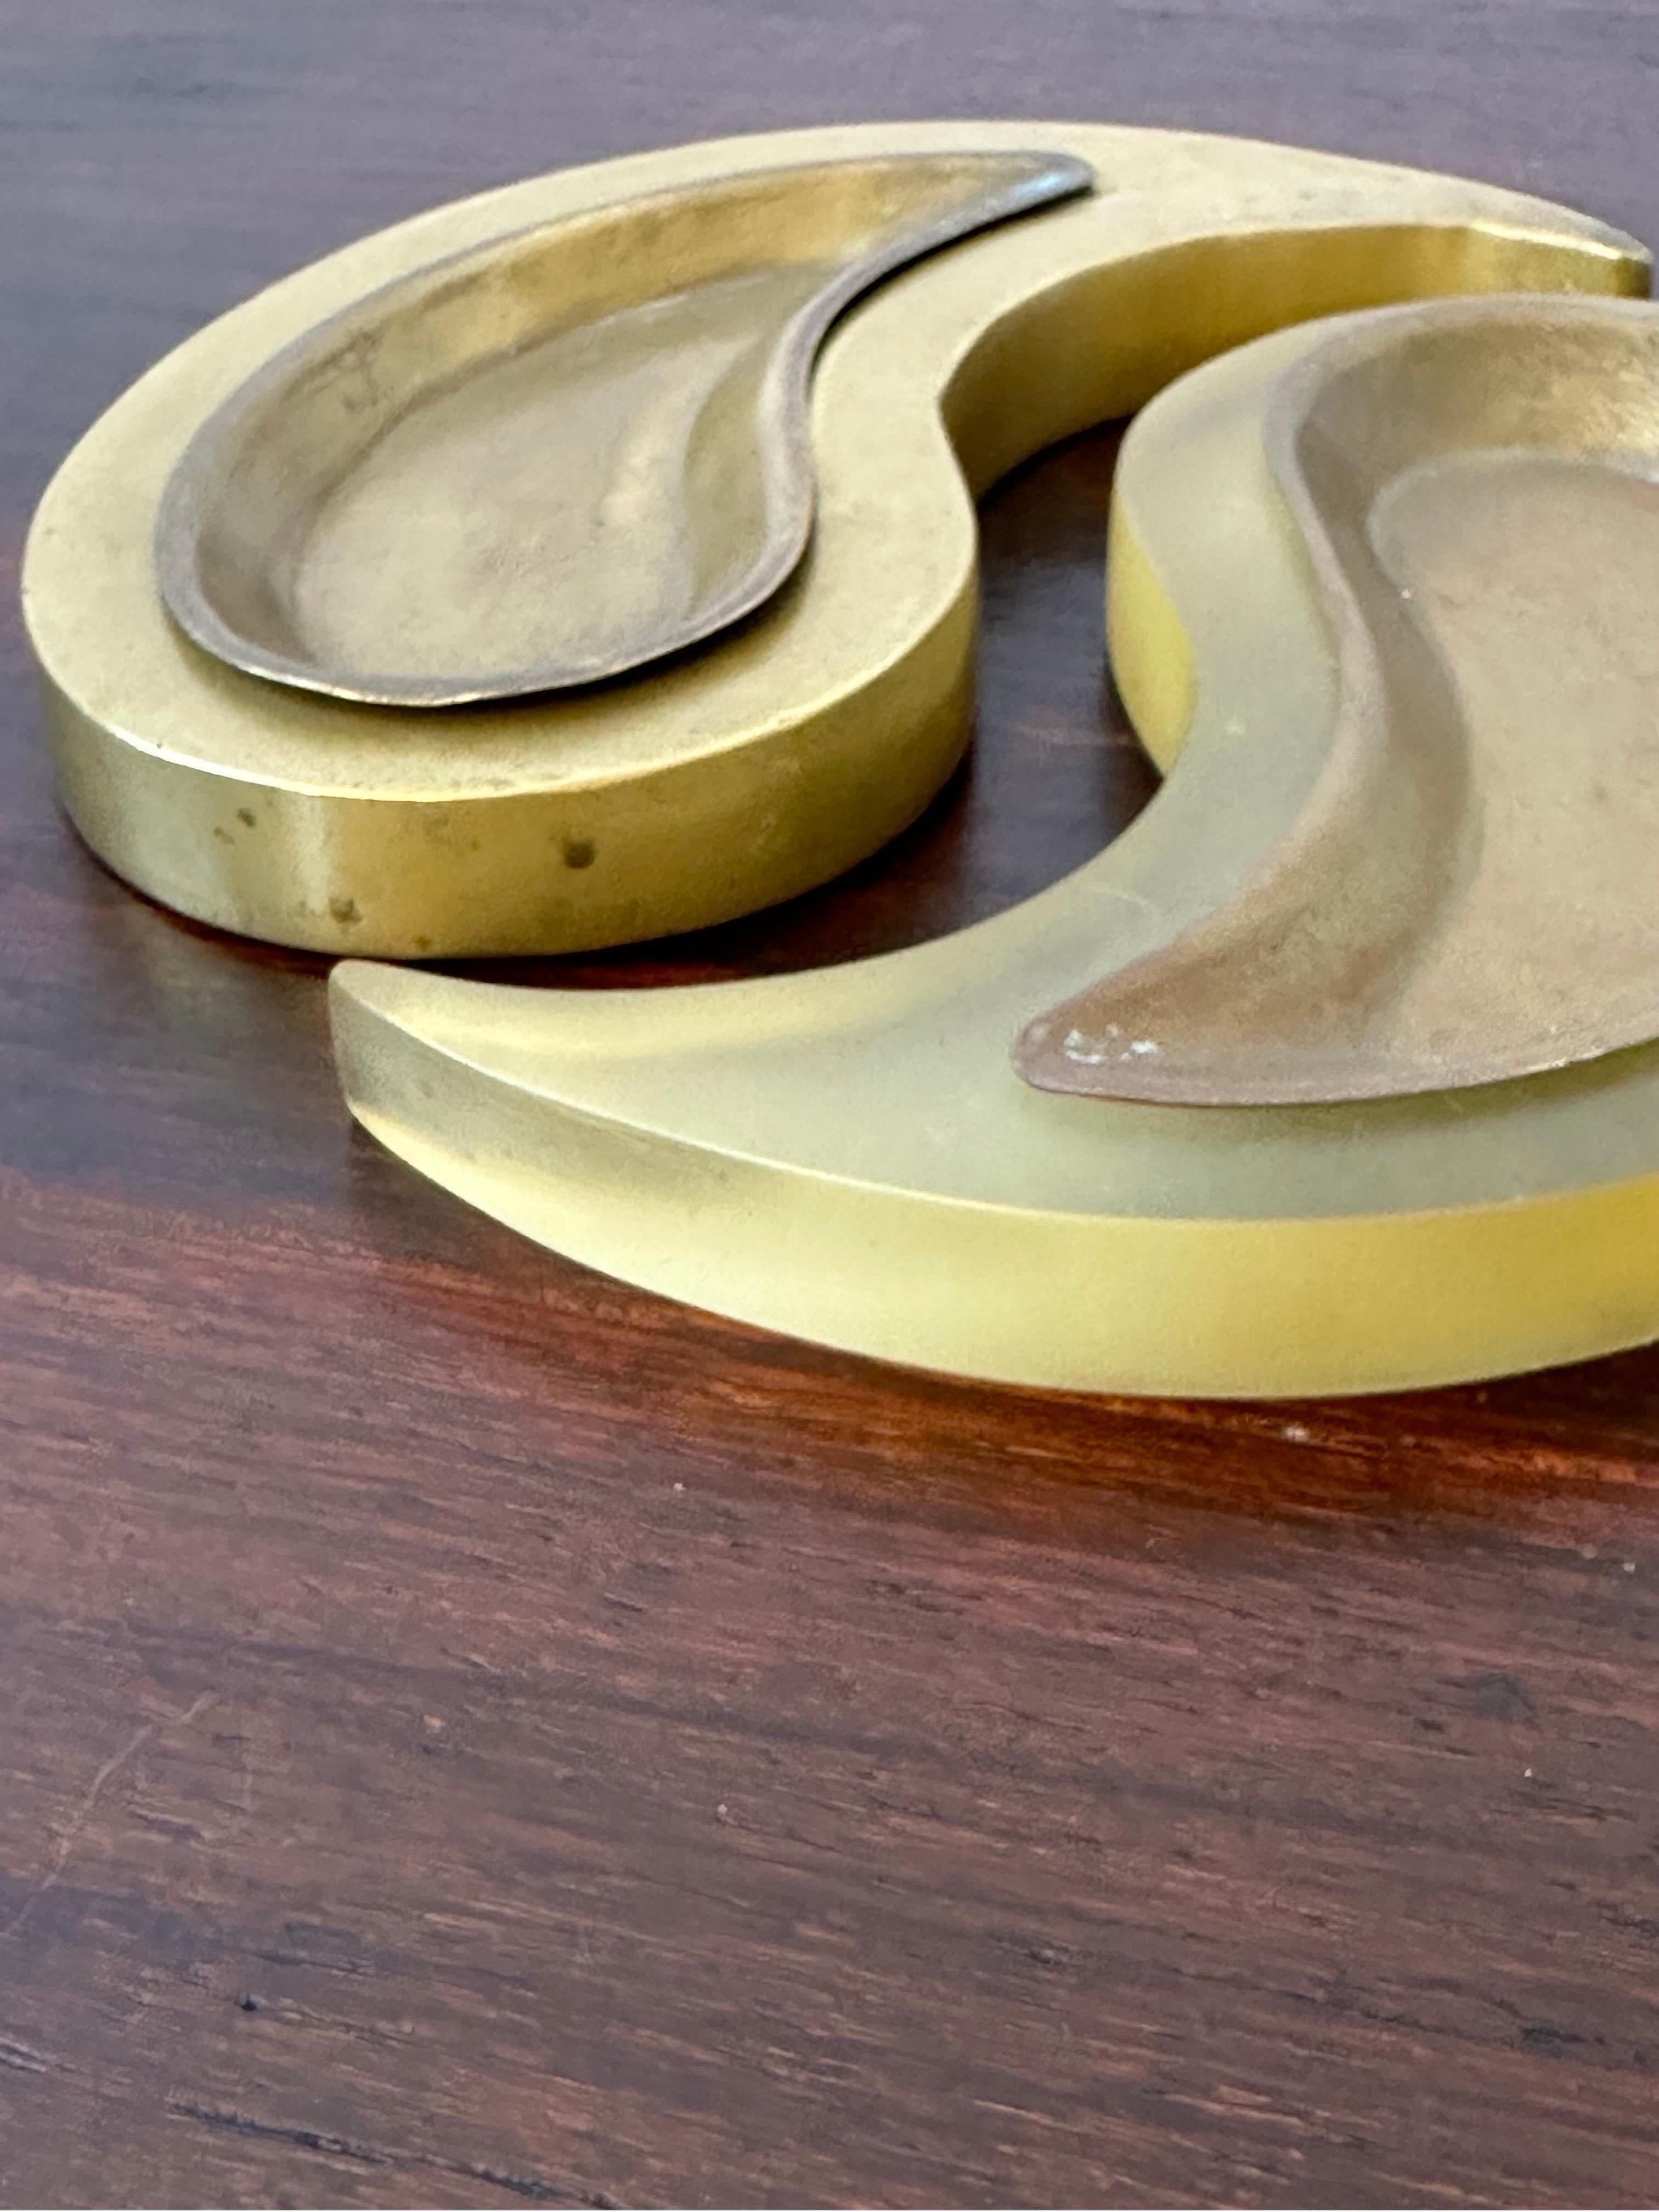 Brazilian Modern Bronze and Acrylic Yin-Yang Ashtray or Catchall Tray, 1980s For Sale 3